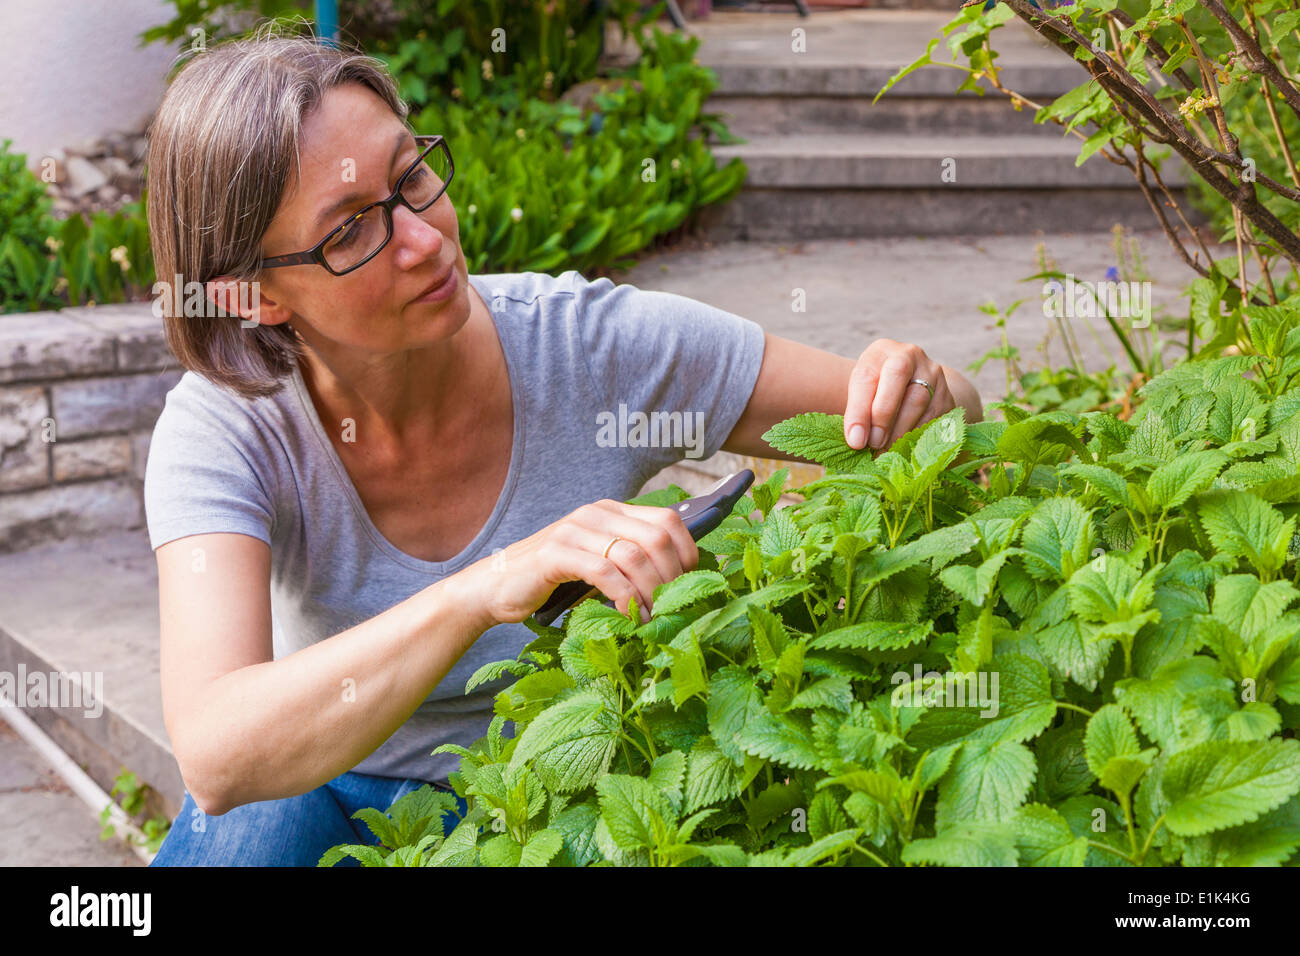 Portrait of woman cutting lemon balm, Melissa officinalis, with gardening clipper Stock Photo